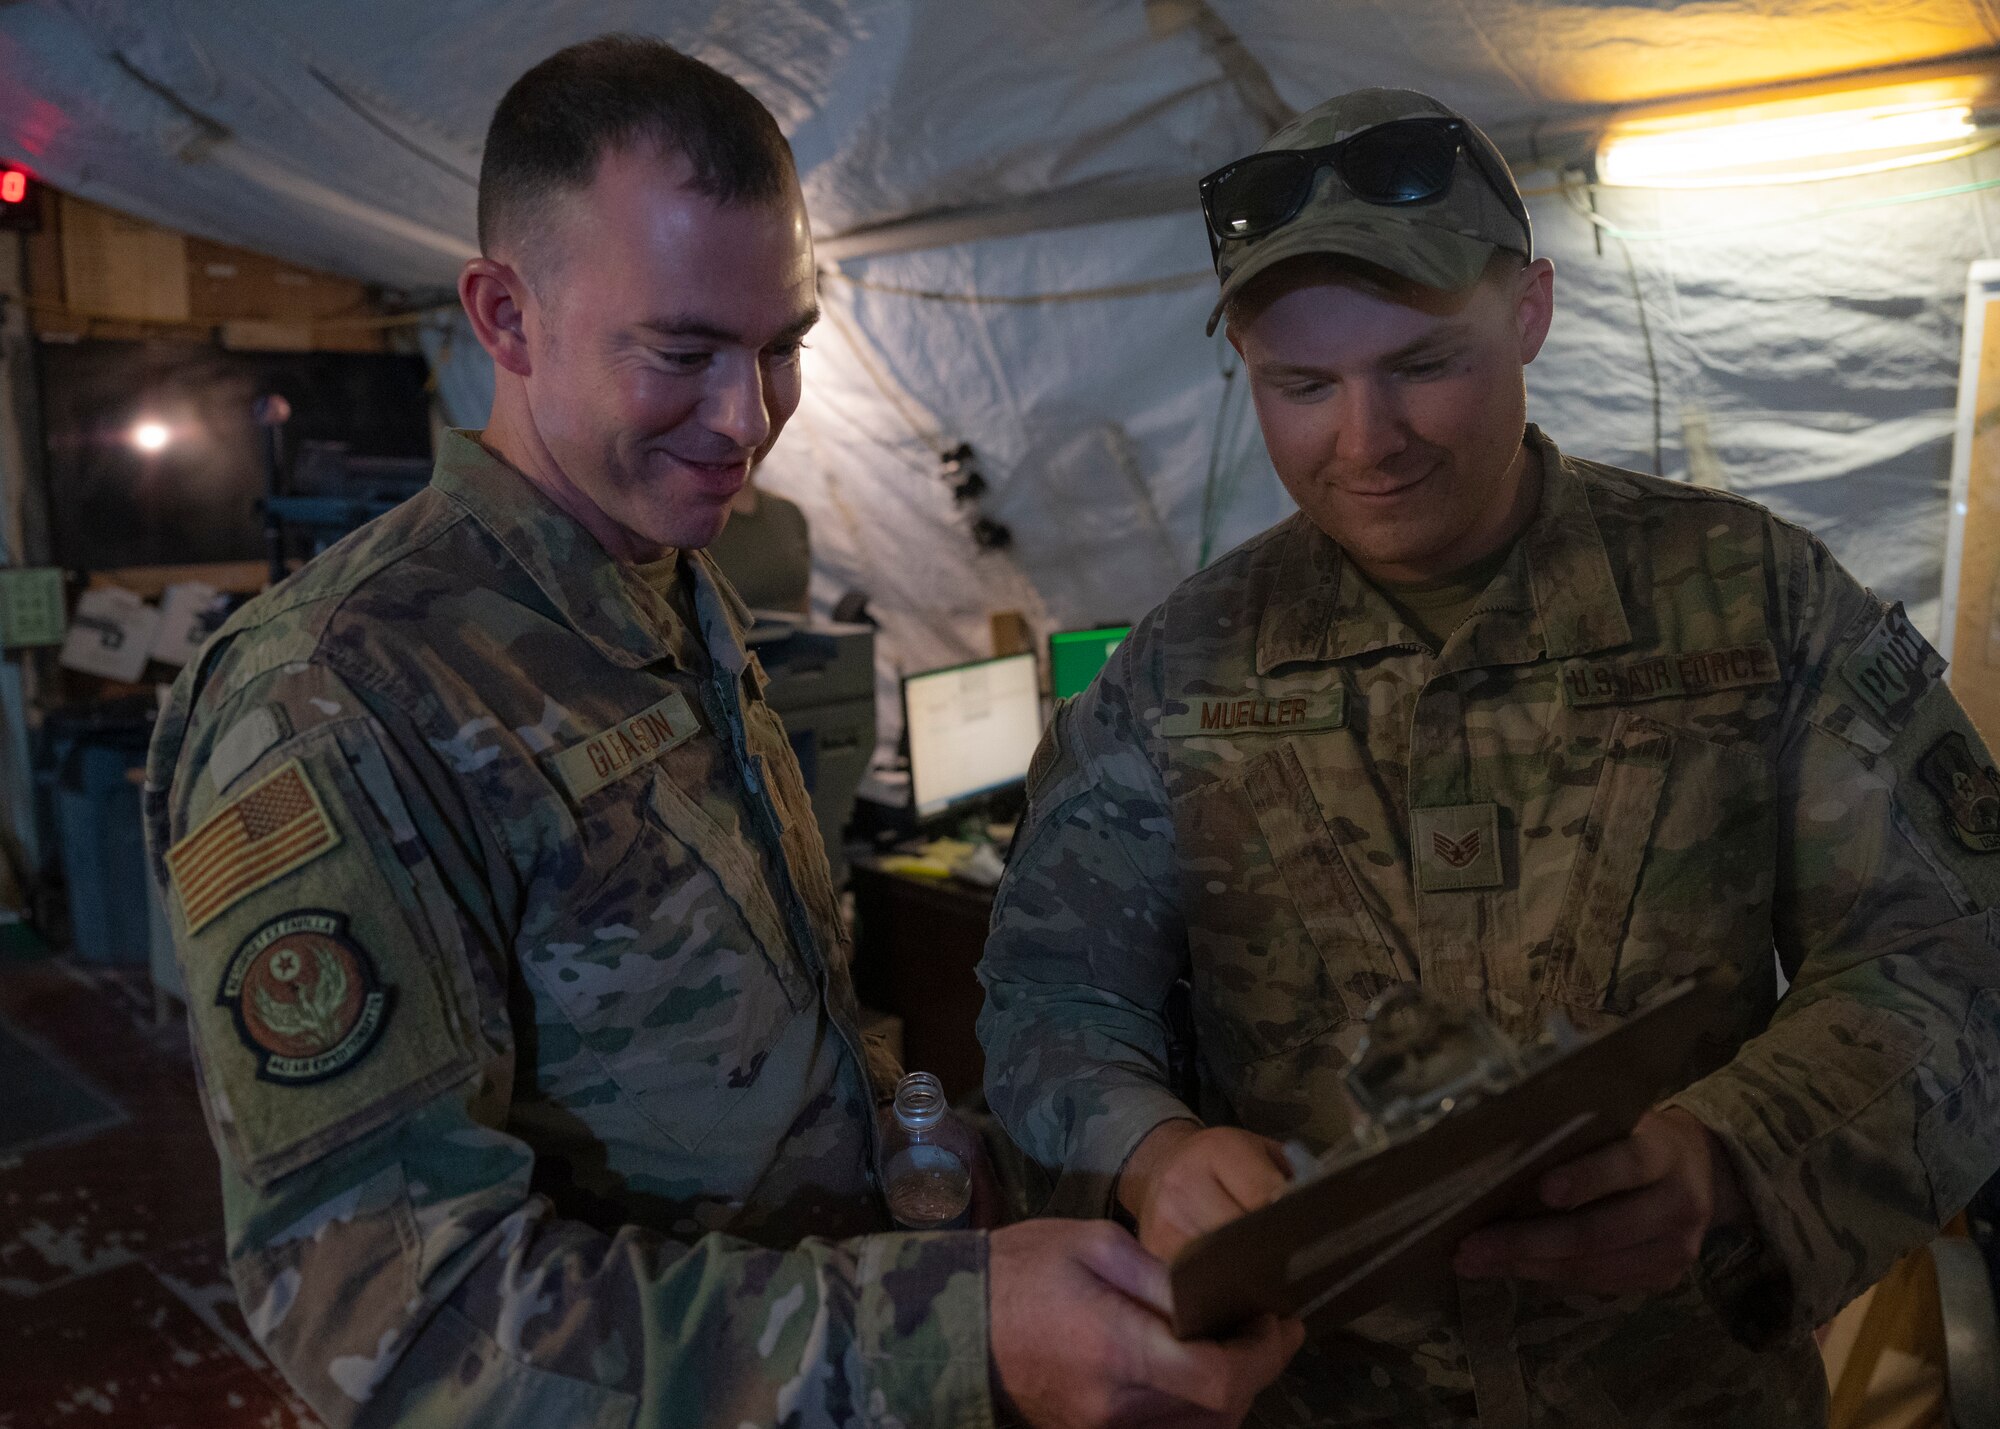 U.S. Air Force Staff Sgts. Grant Gleason and Jacob Mueller, 443rd Air Expeditionary Squadron heavy equipment operators, review documents at Al Asad Air Base, Iraq, Sept. 22, 2021.